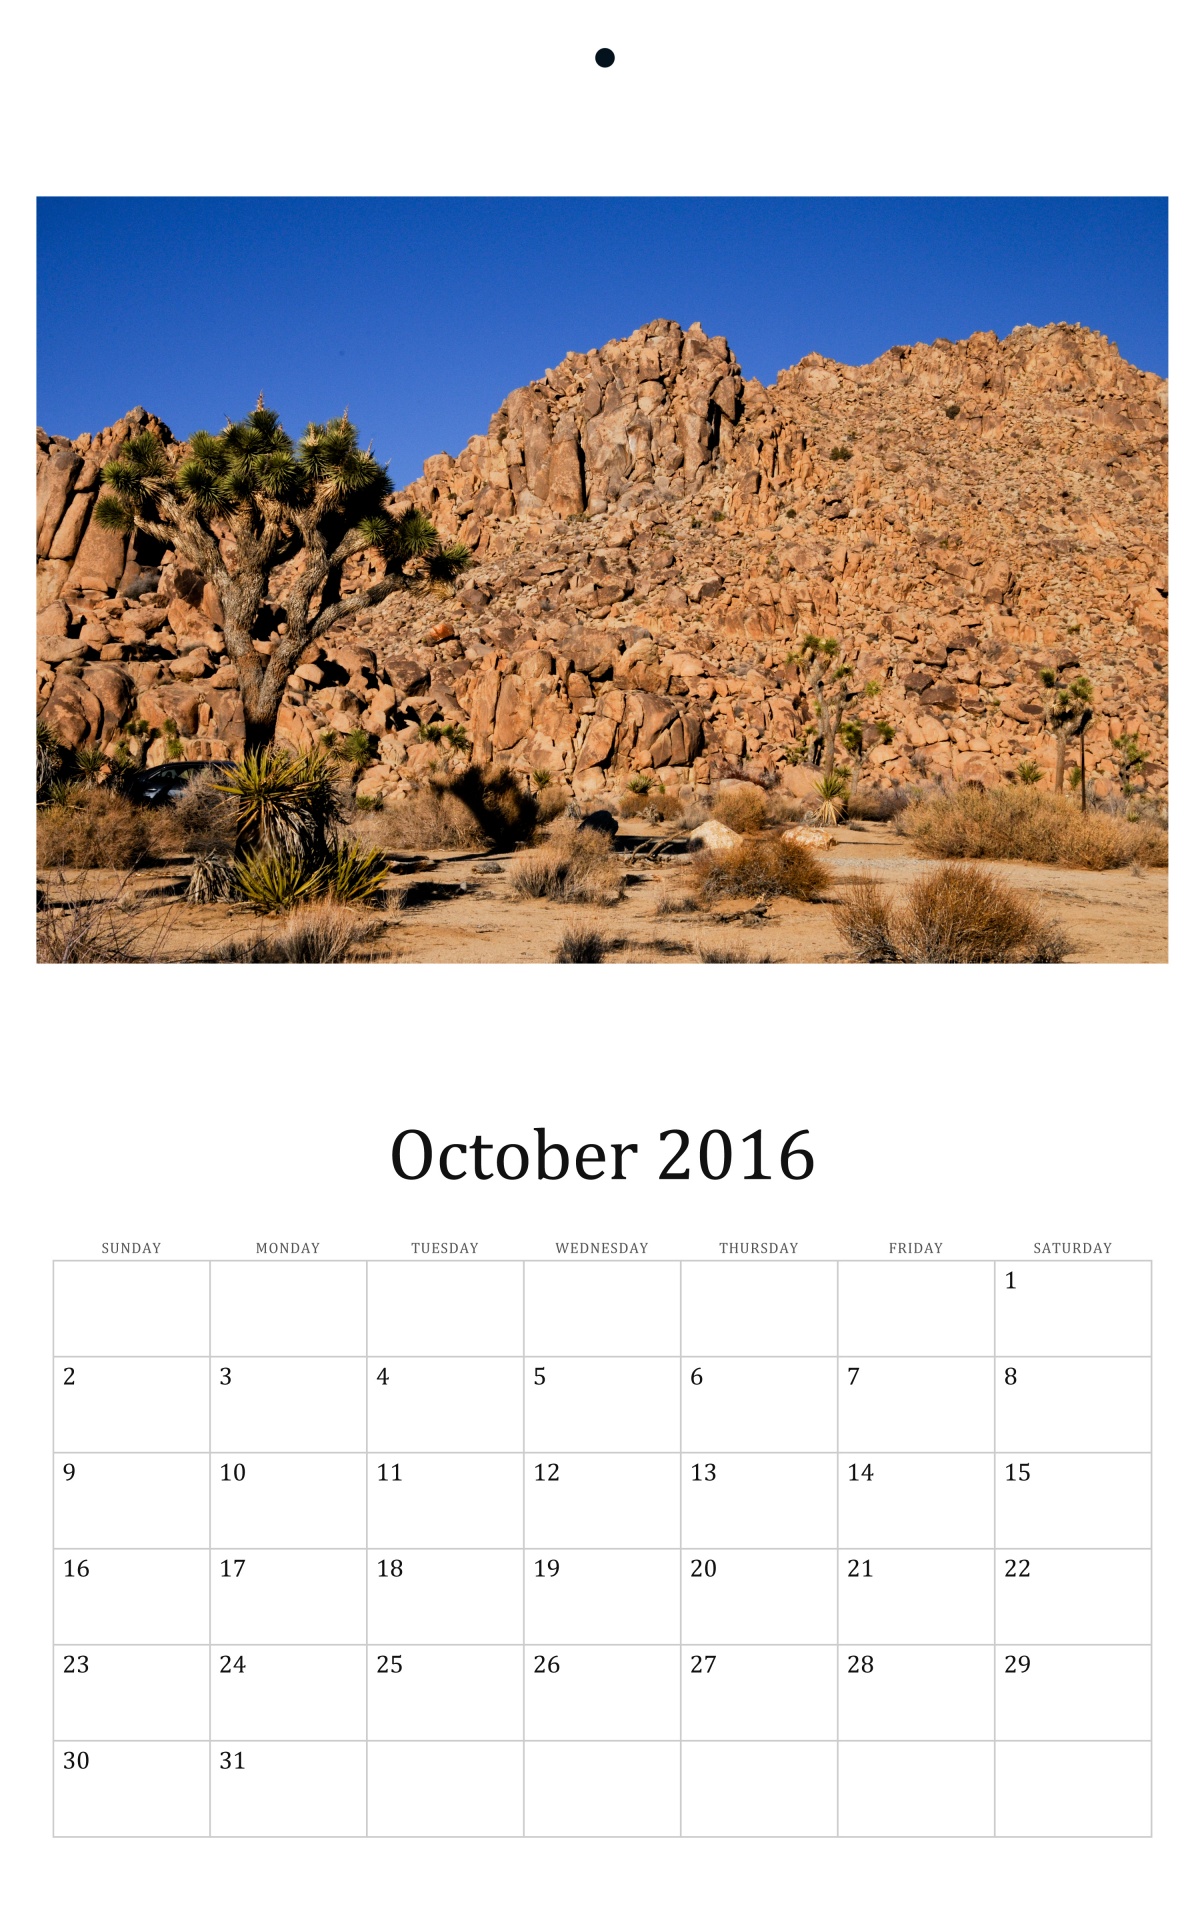 october-2017-calendar-templates-for-word-excel-and-pdf